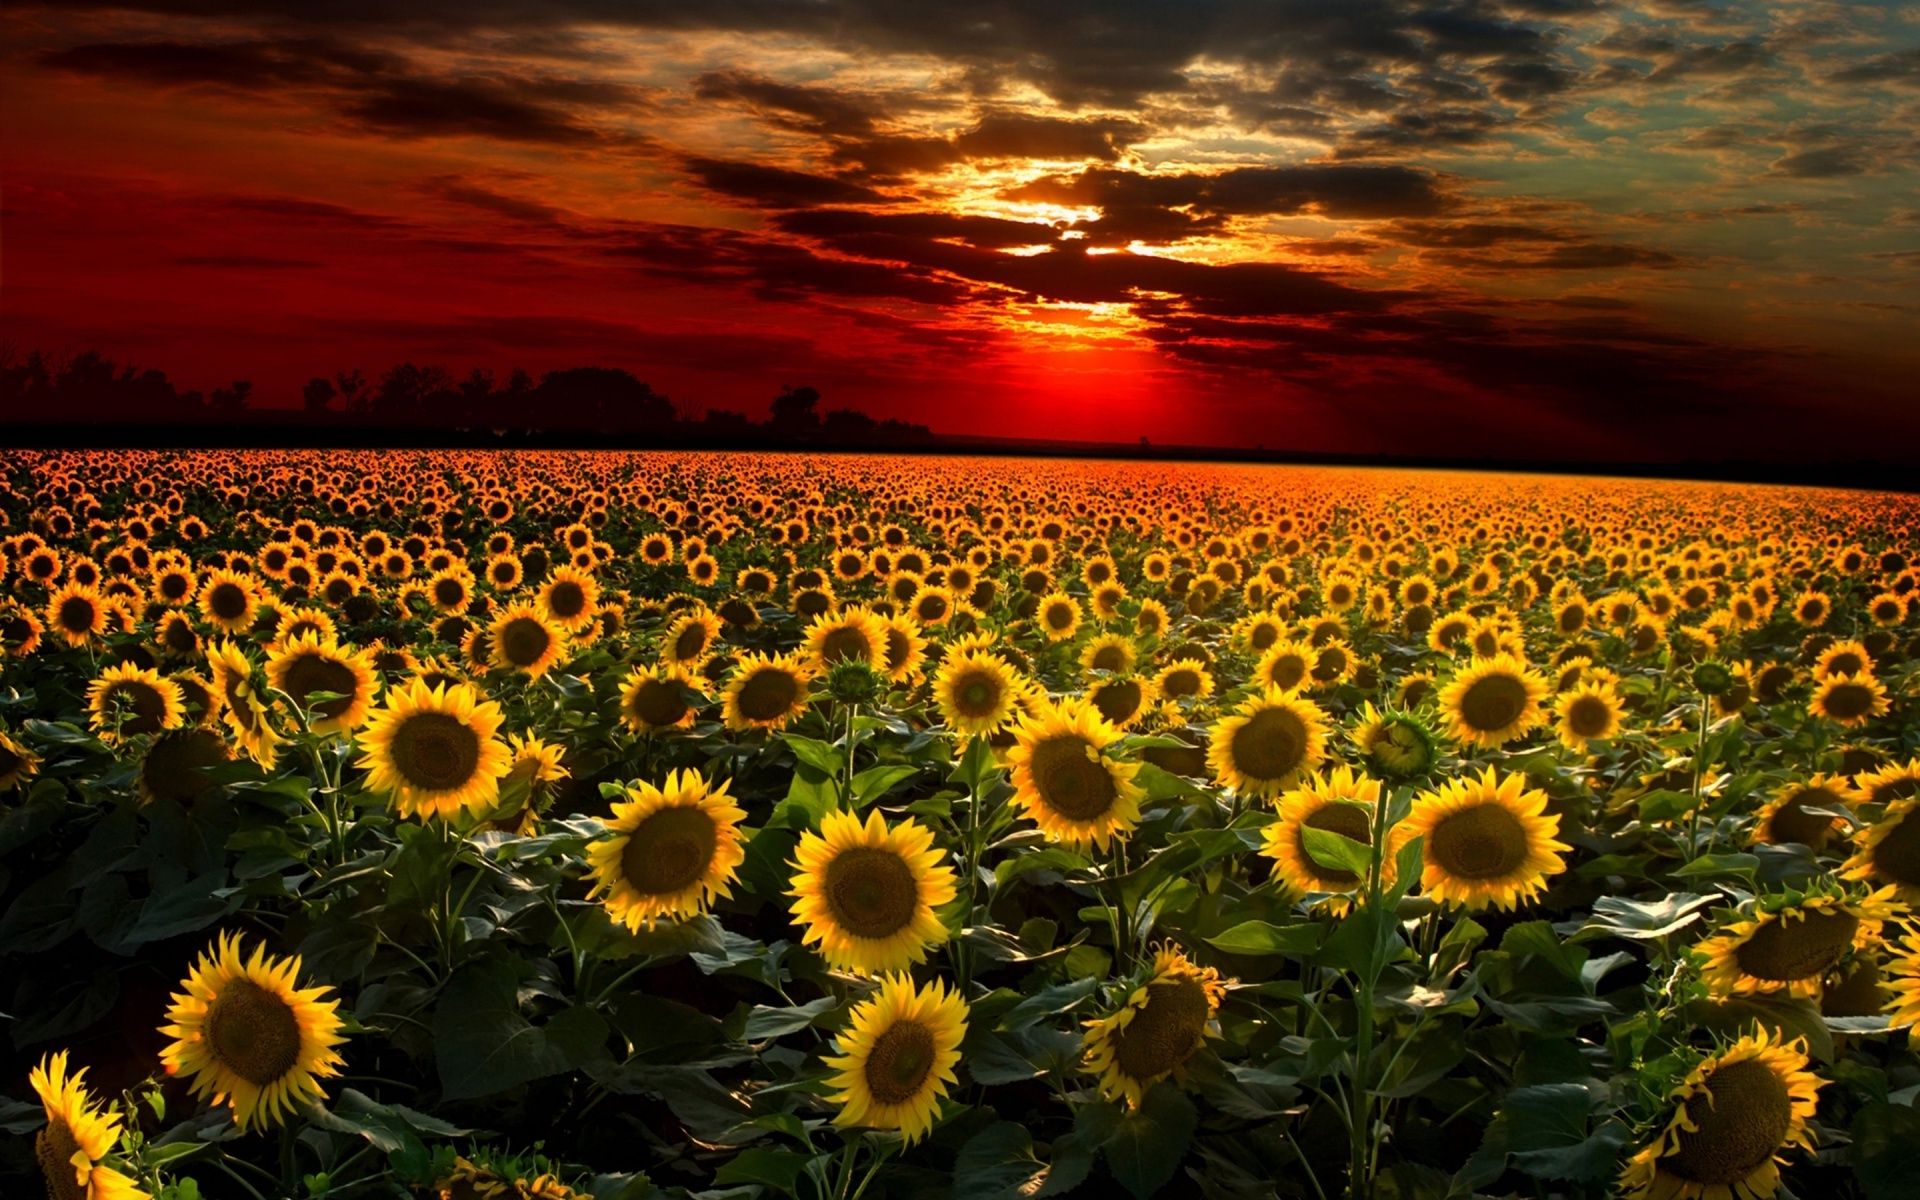 Sunflower Sunset Wallpapers Images | Lugares para visitar ...